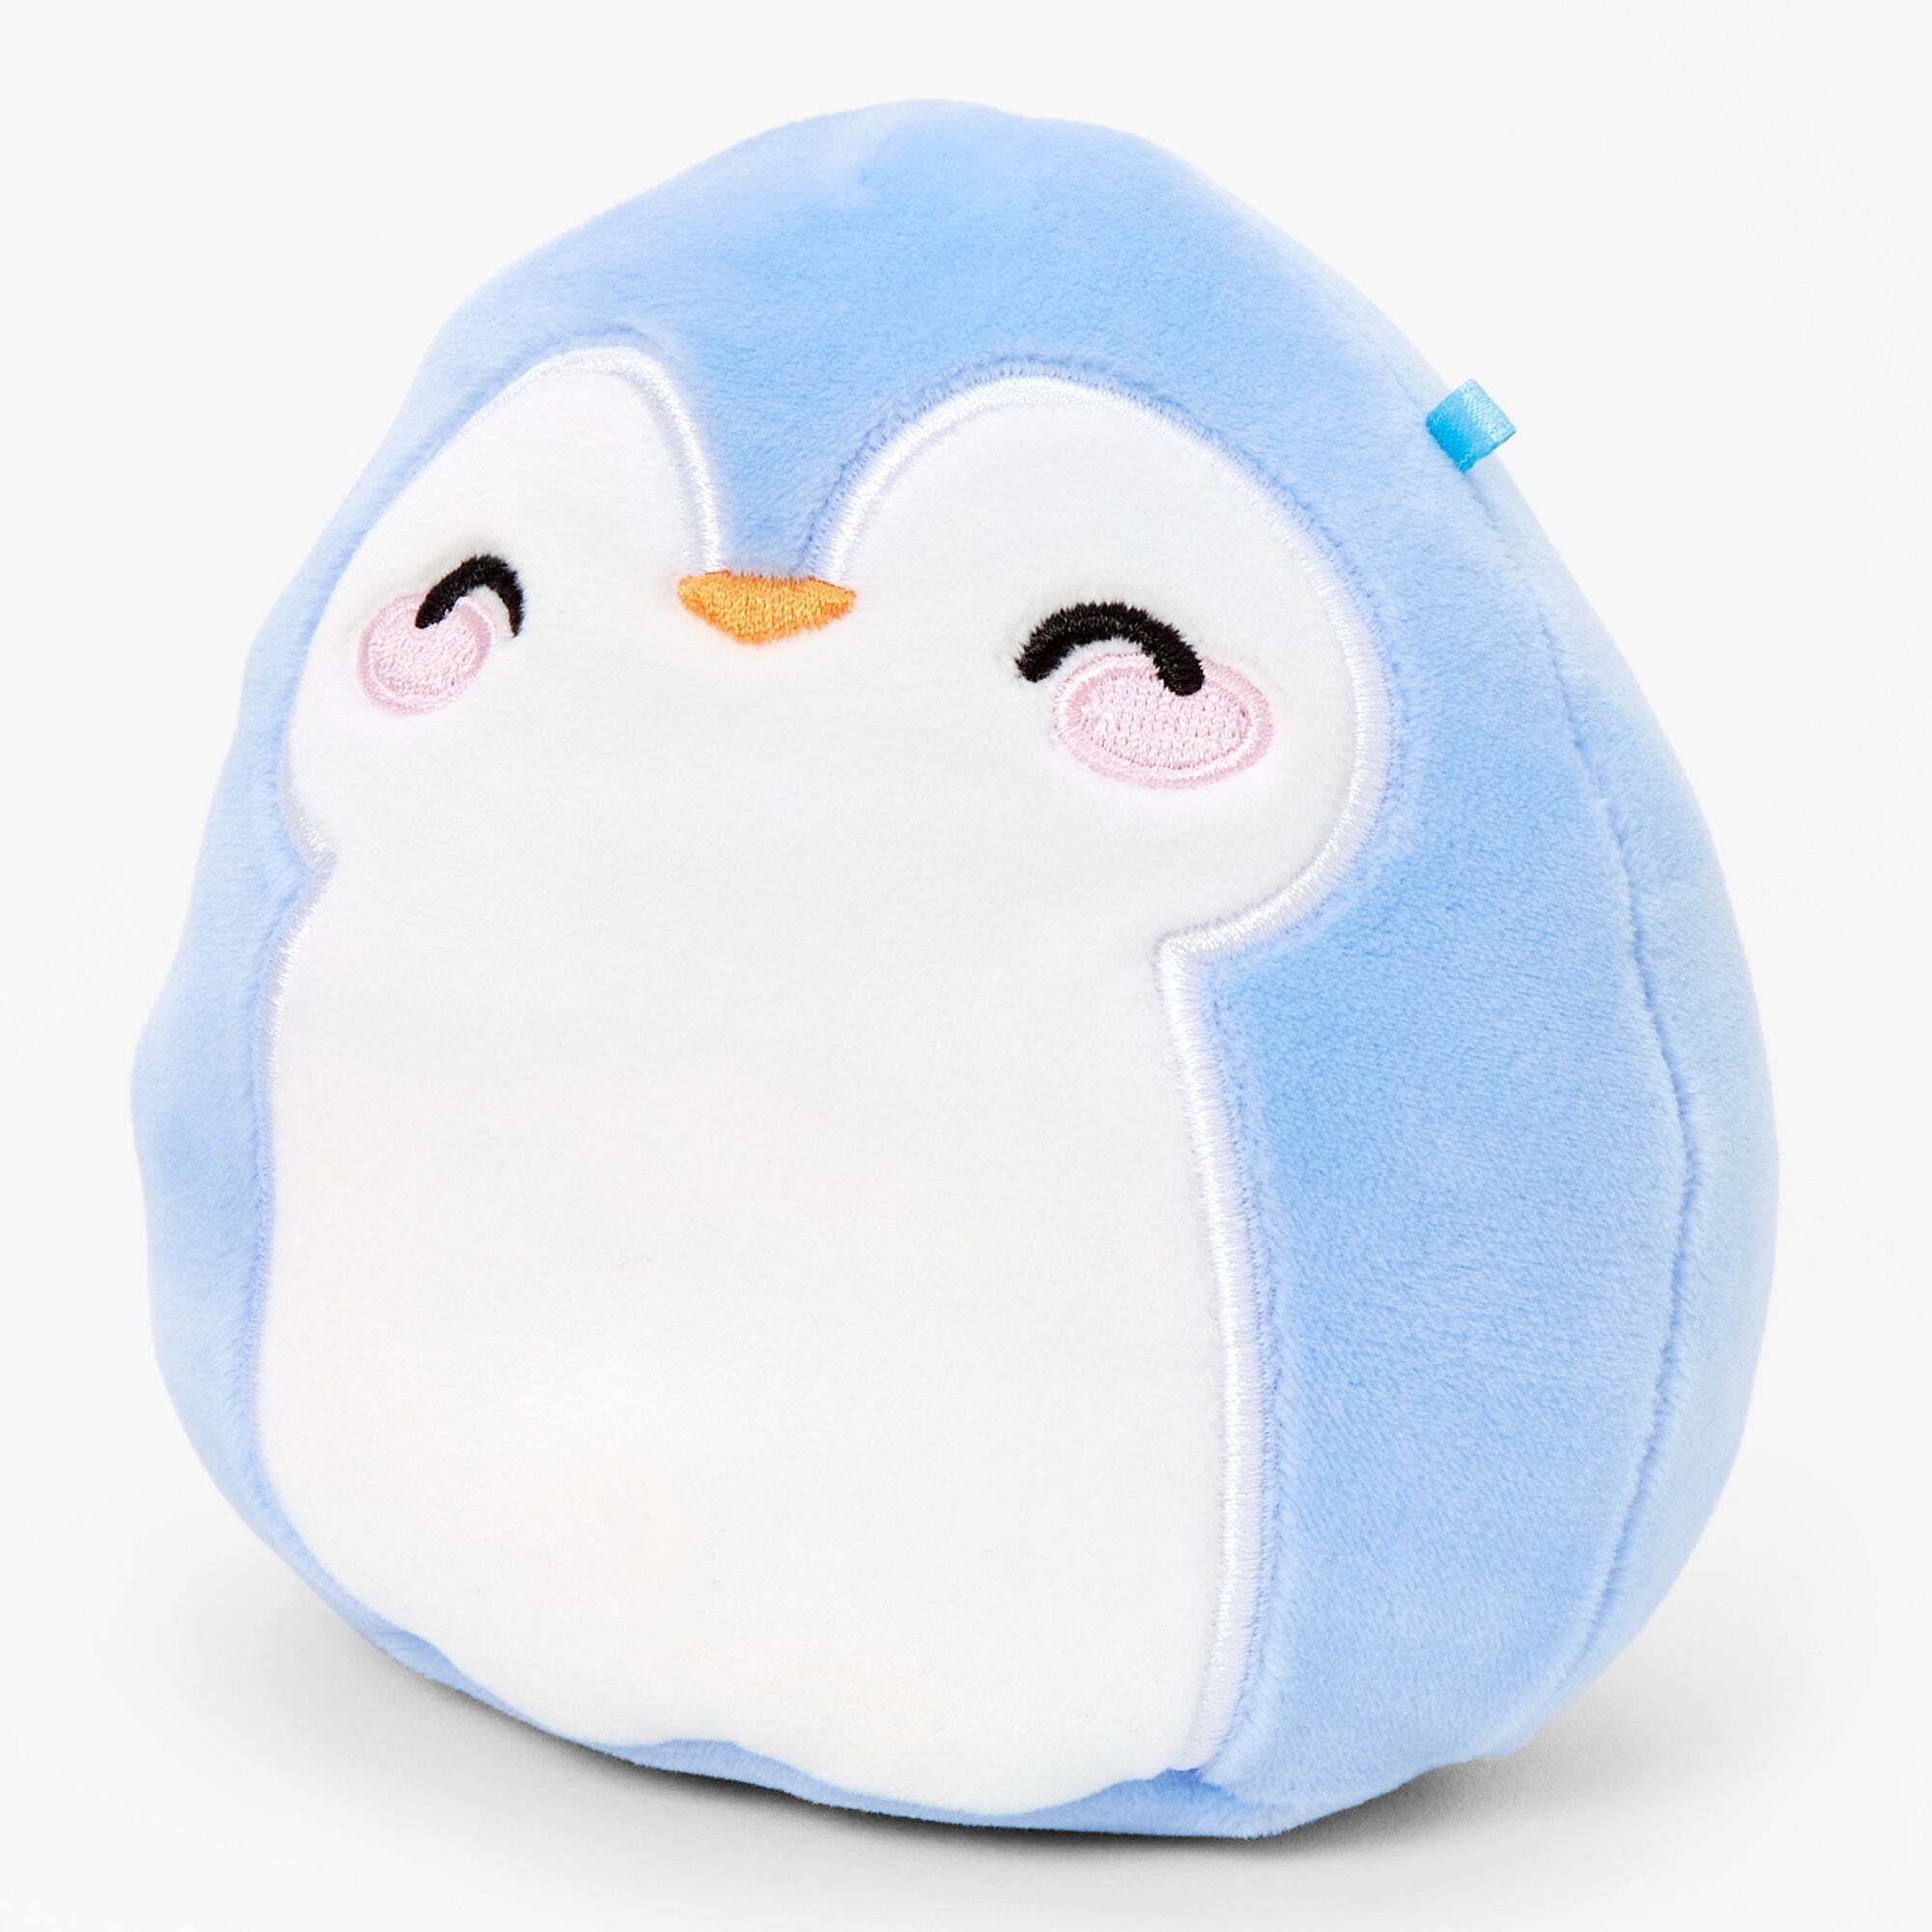 Blue Bird 3.5 inch Squishmallow Clip-on Soft Plush Toy by Kellytoy Penguin Cute 